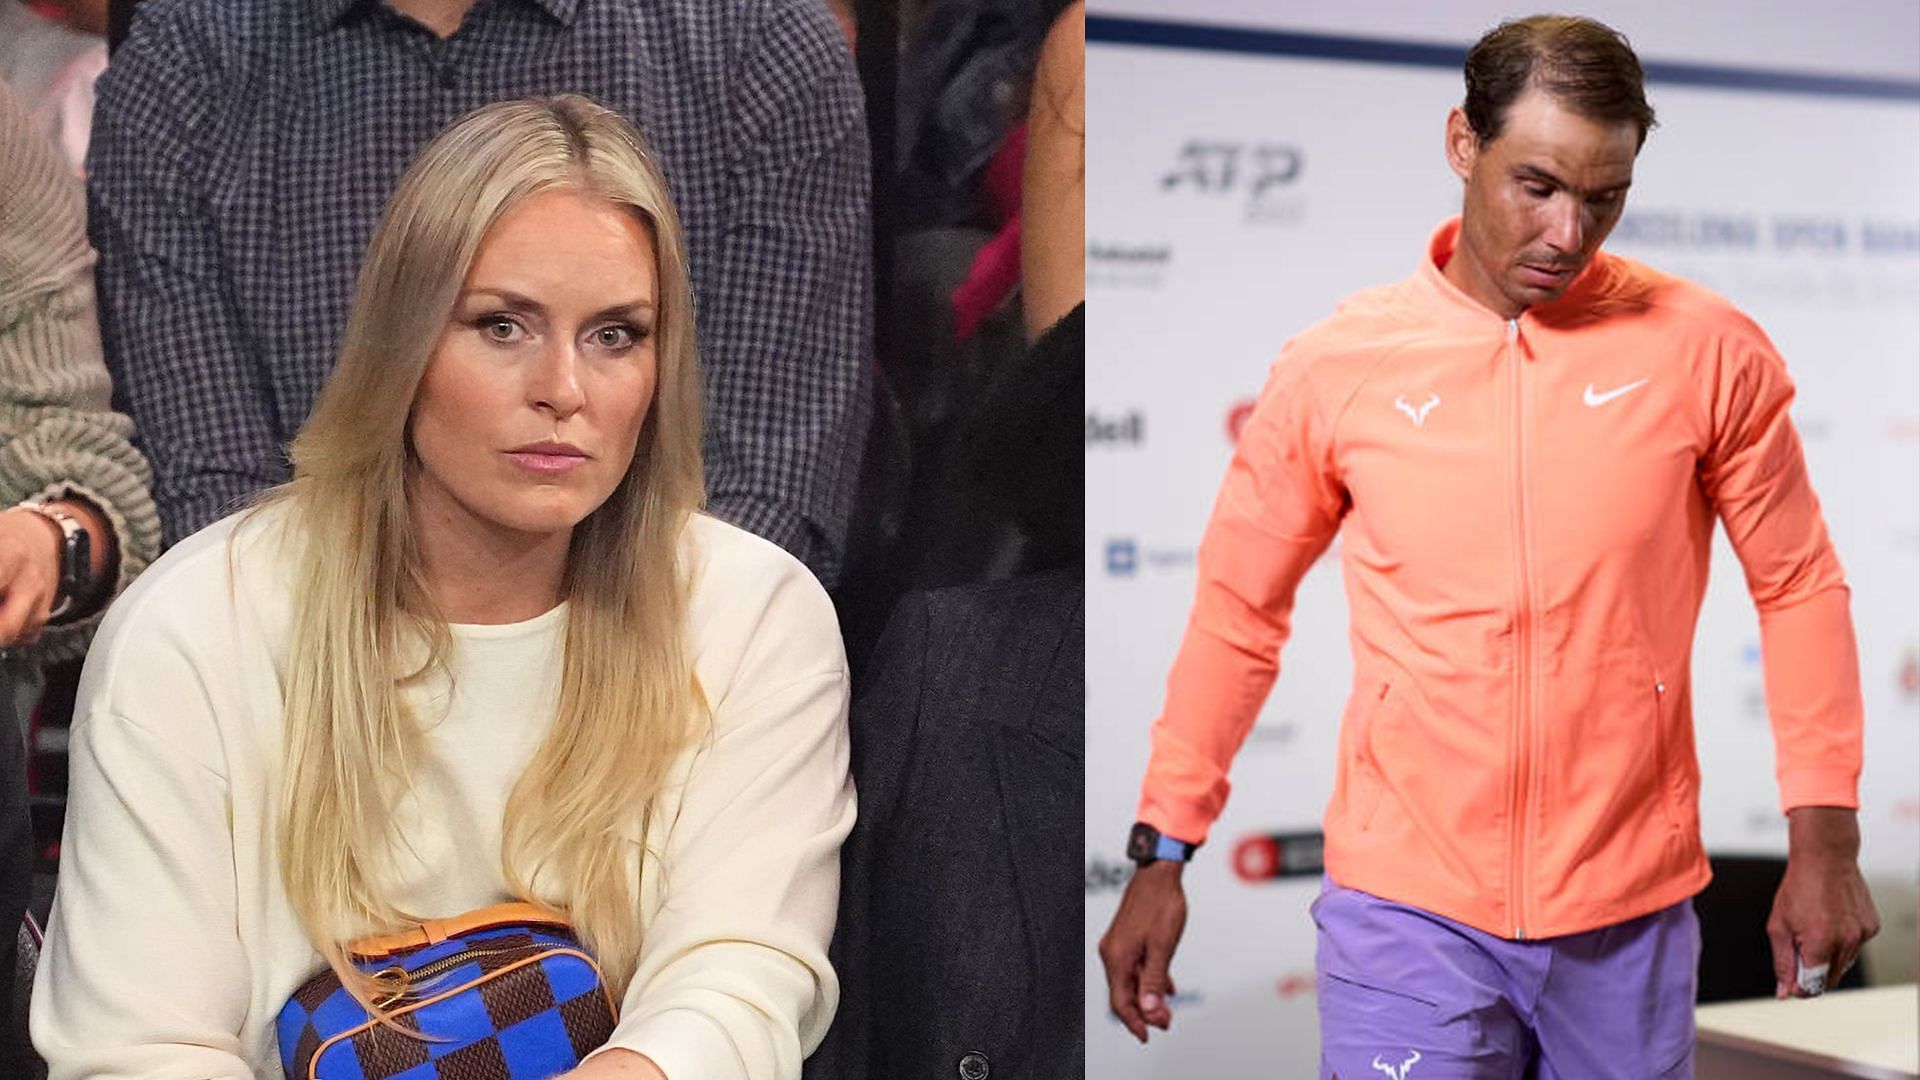 Lindsey Vonn expresses disappointment after Rafael Nadal exits Barcelona Open.